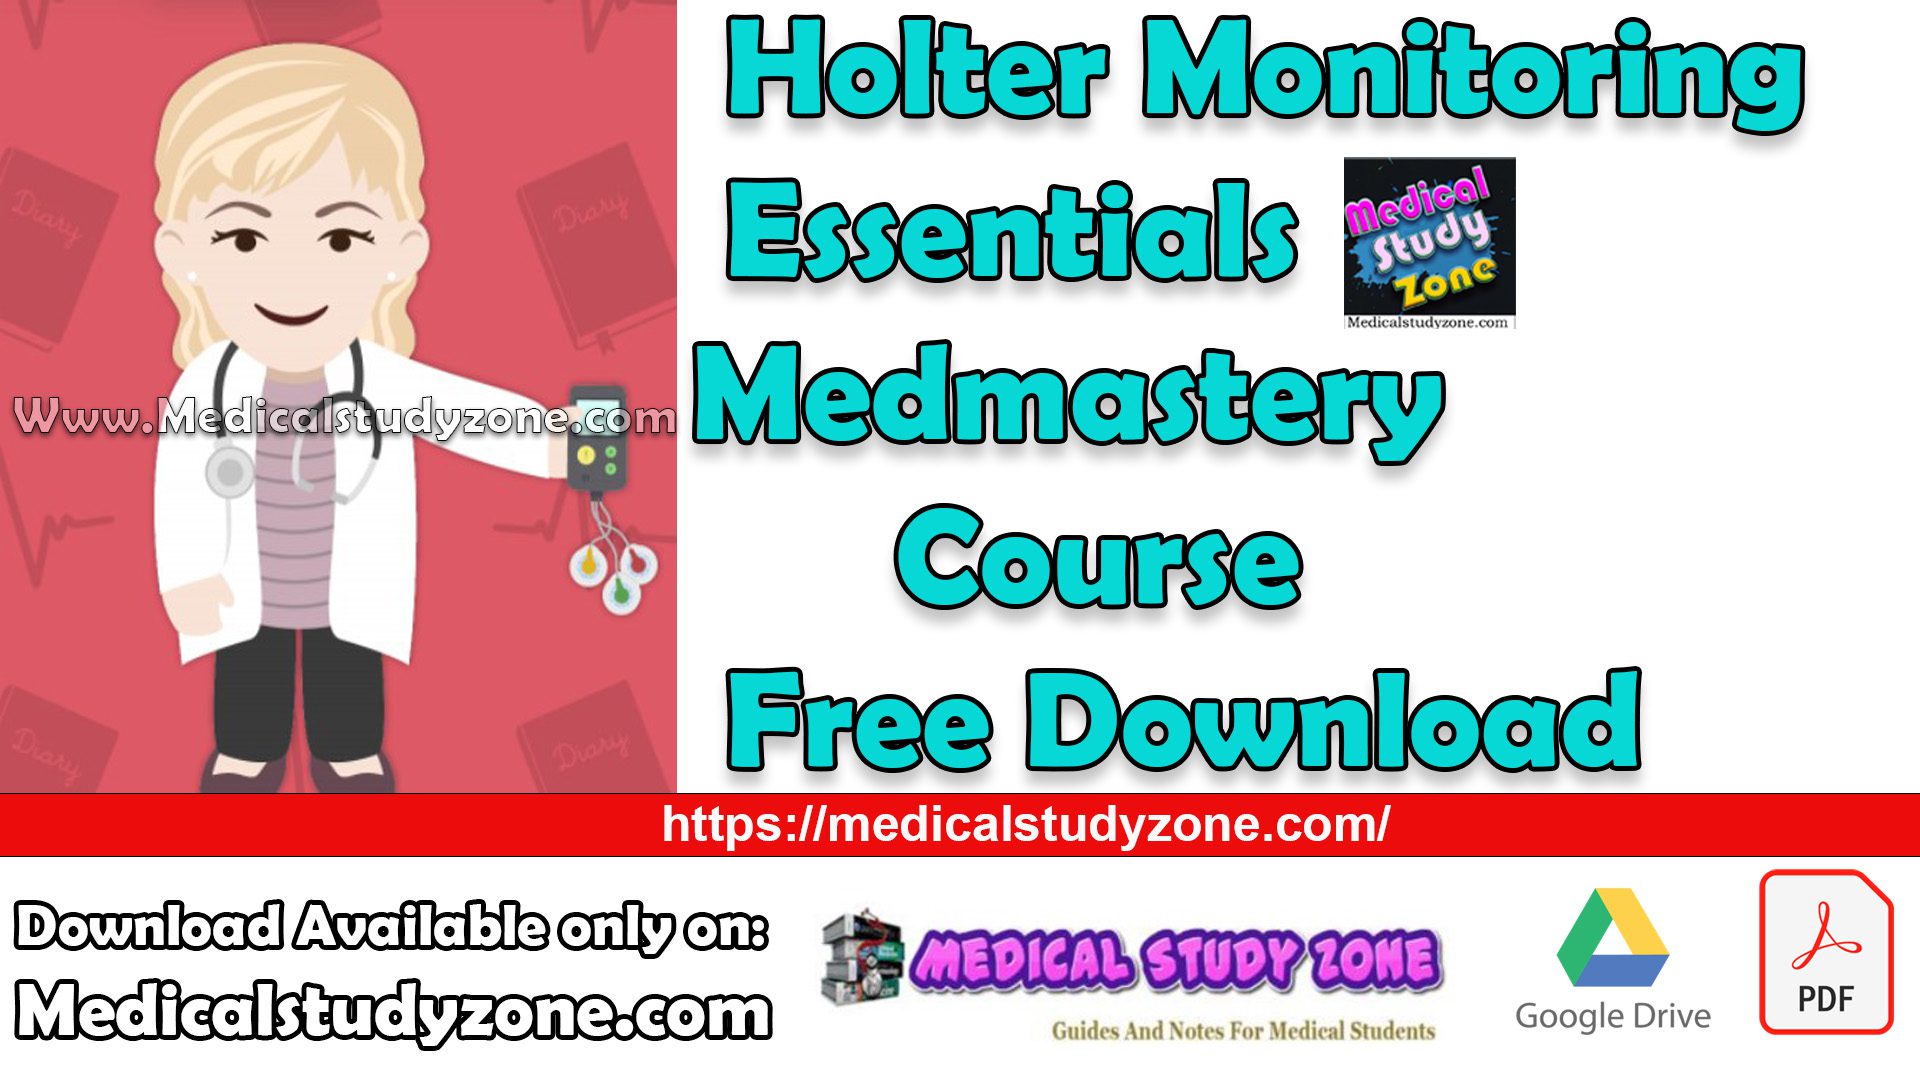 Holter Monitoring Essentials Medmastery Course Free Download